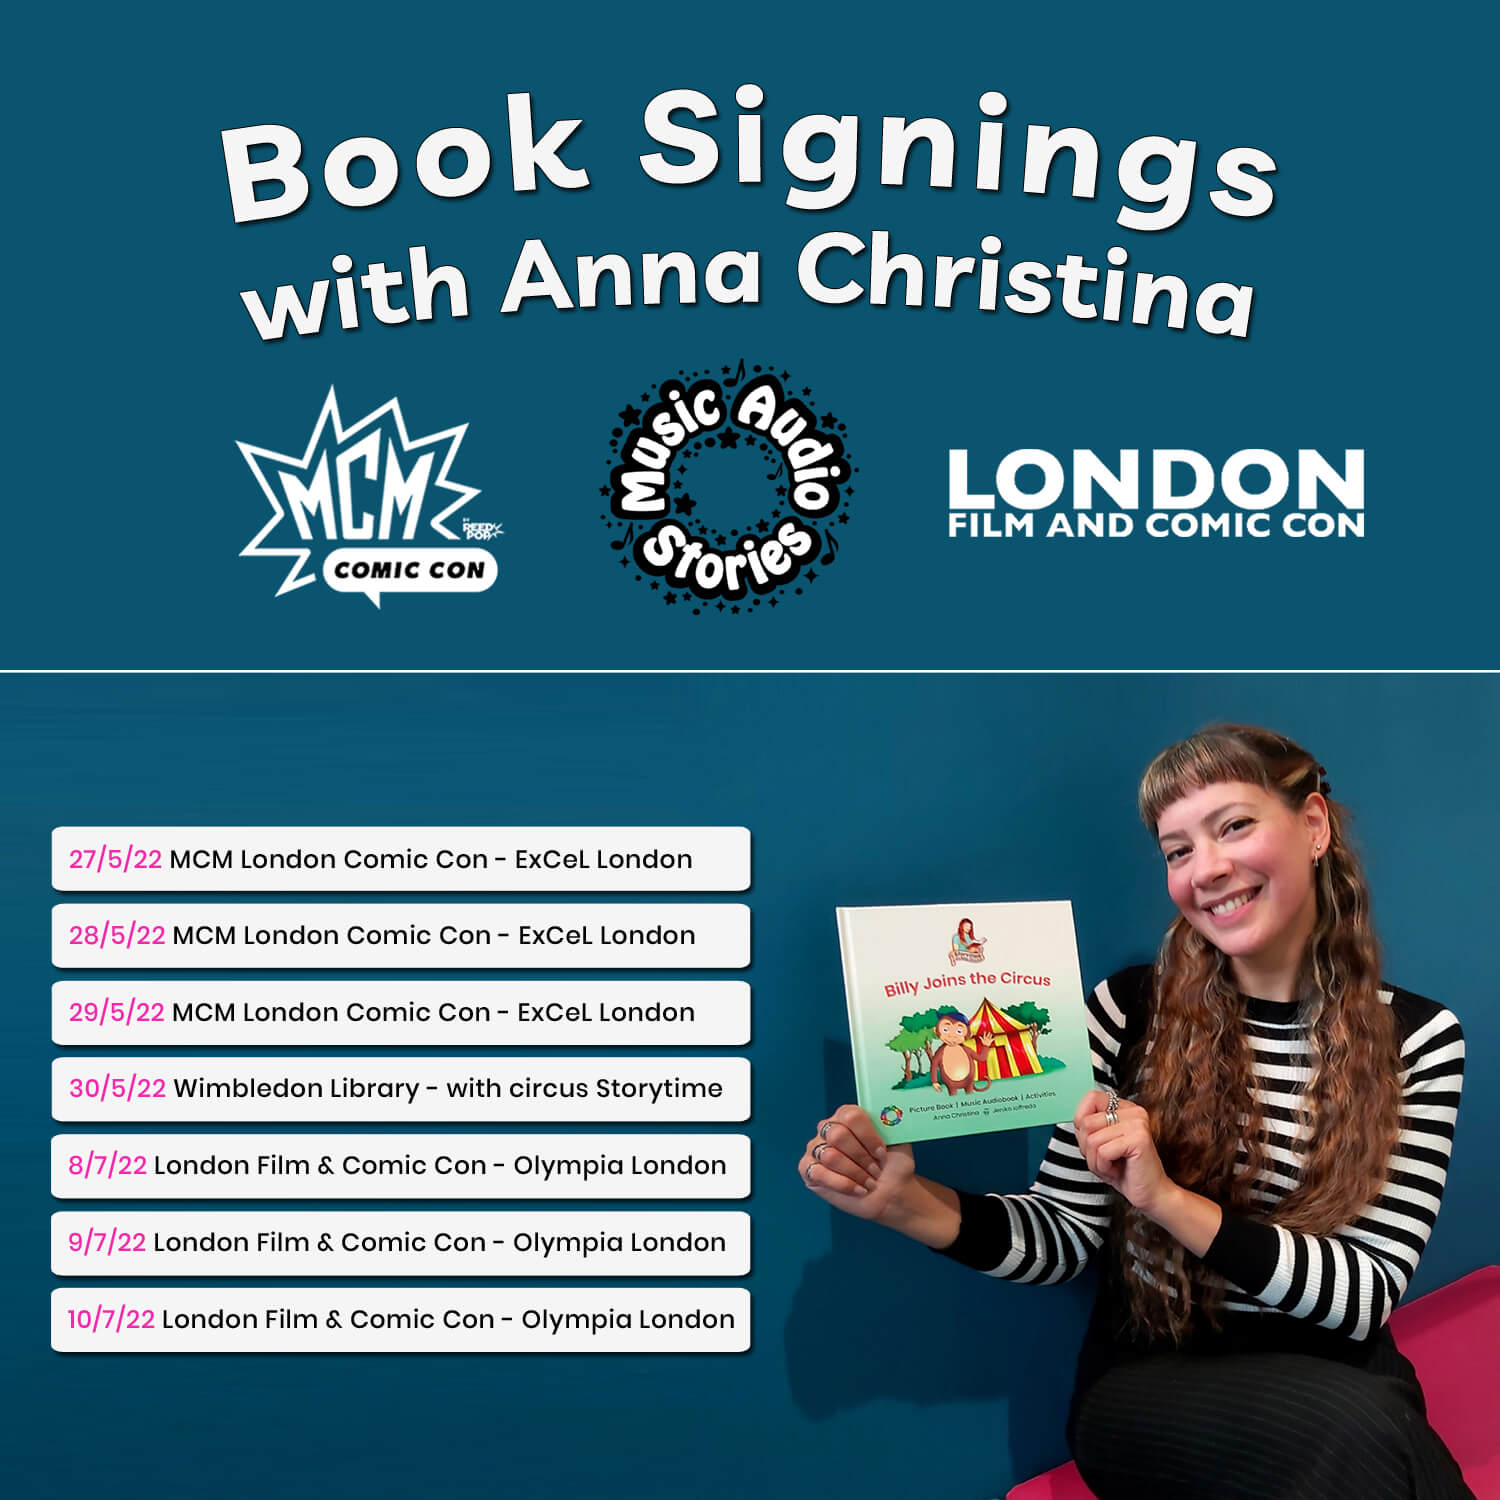 Anna-Christina from Music Audio Stories, book signing events - MCM London Comic Con and London Film & Comic Con